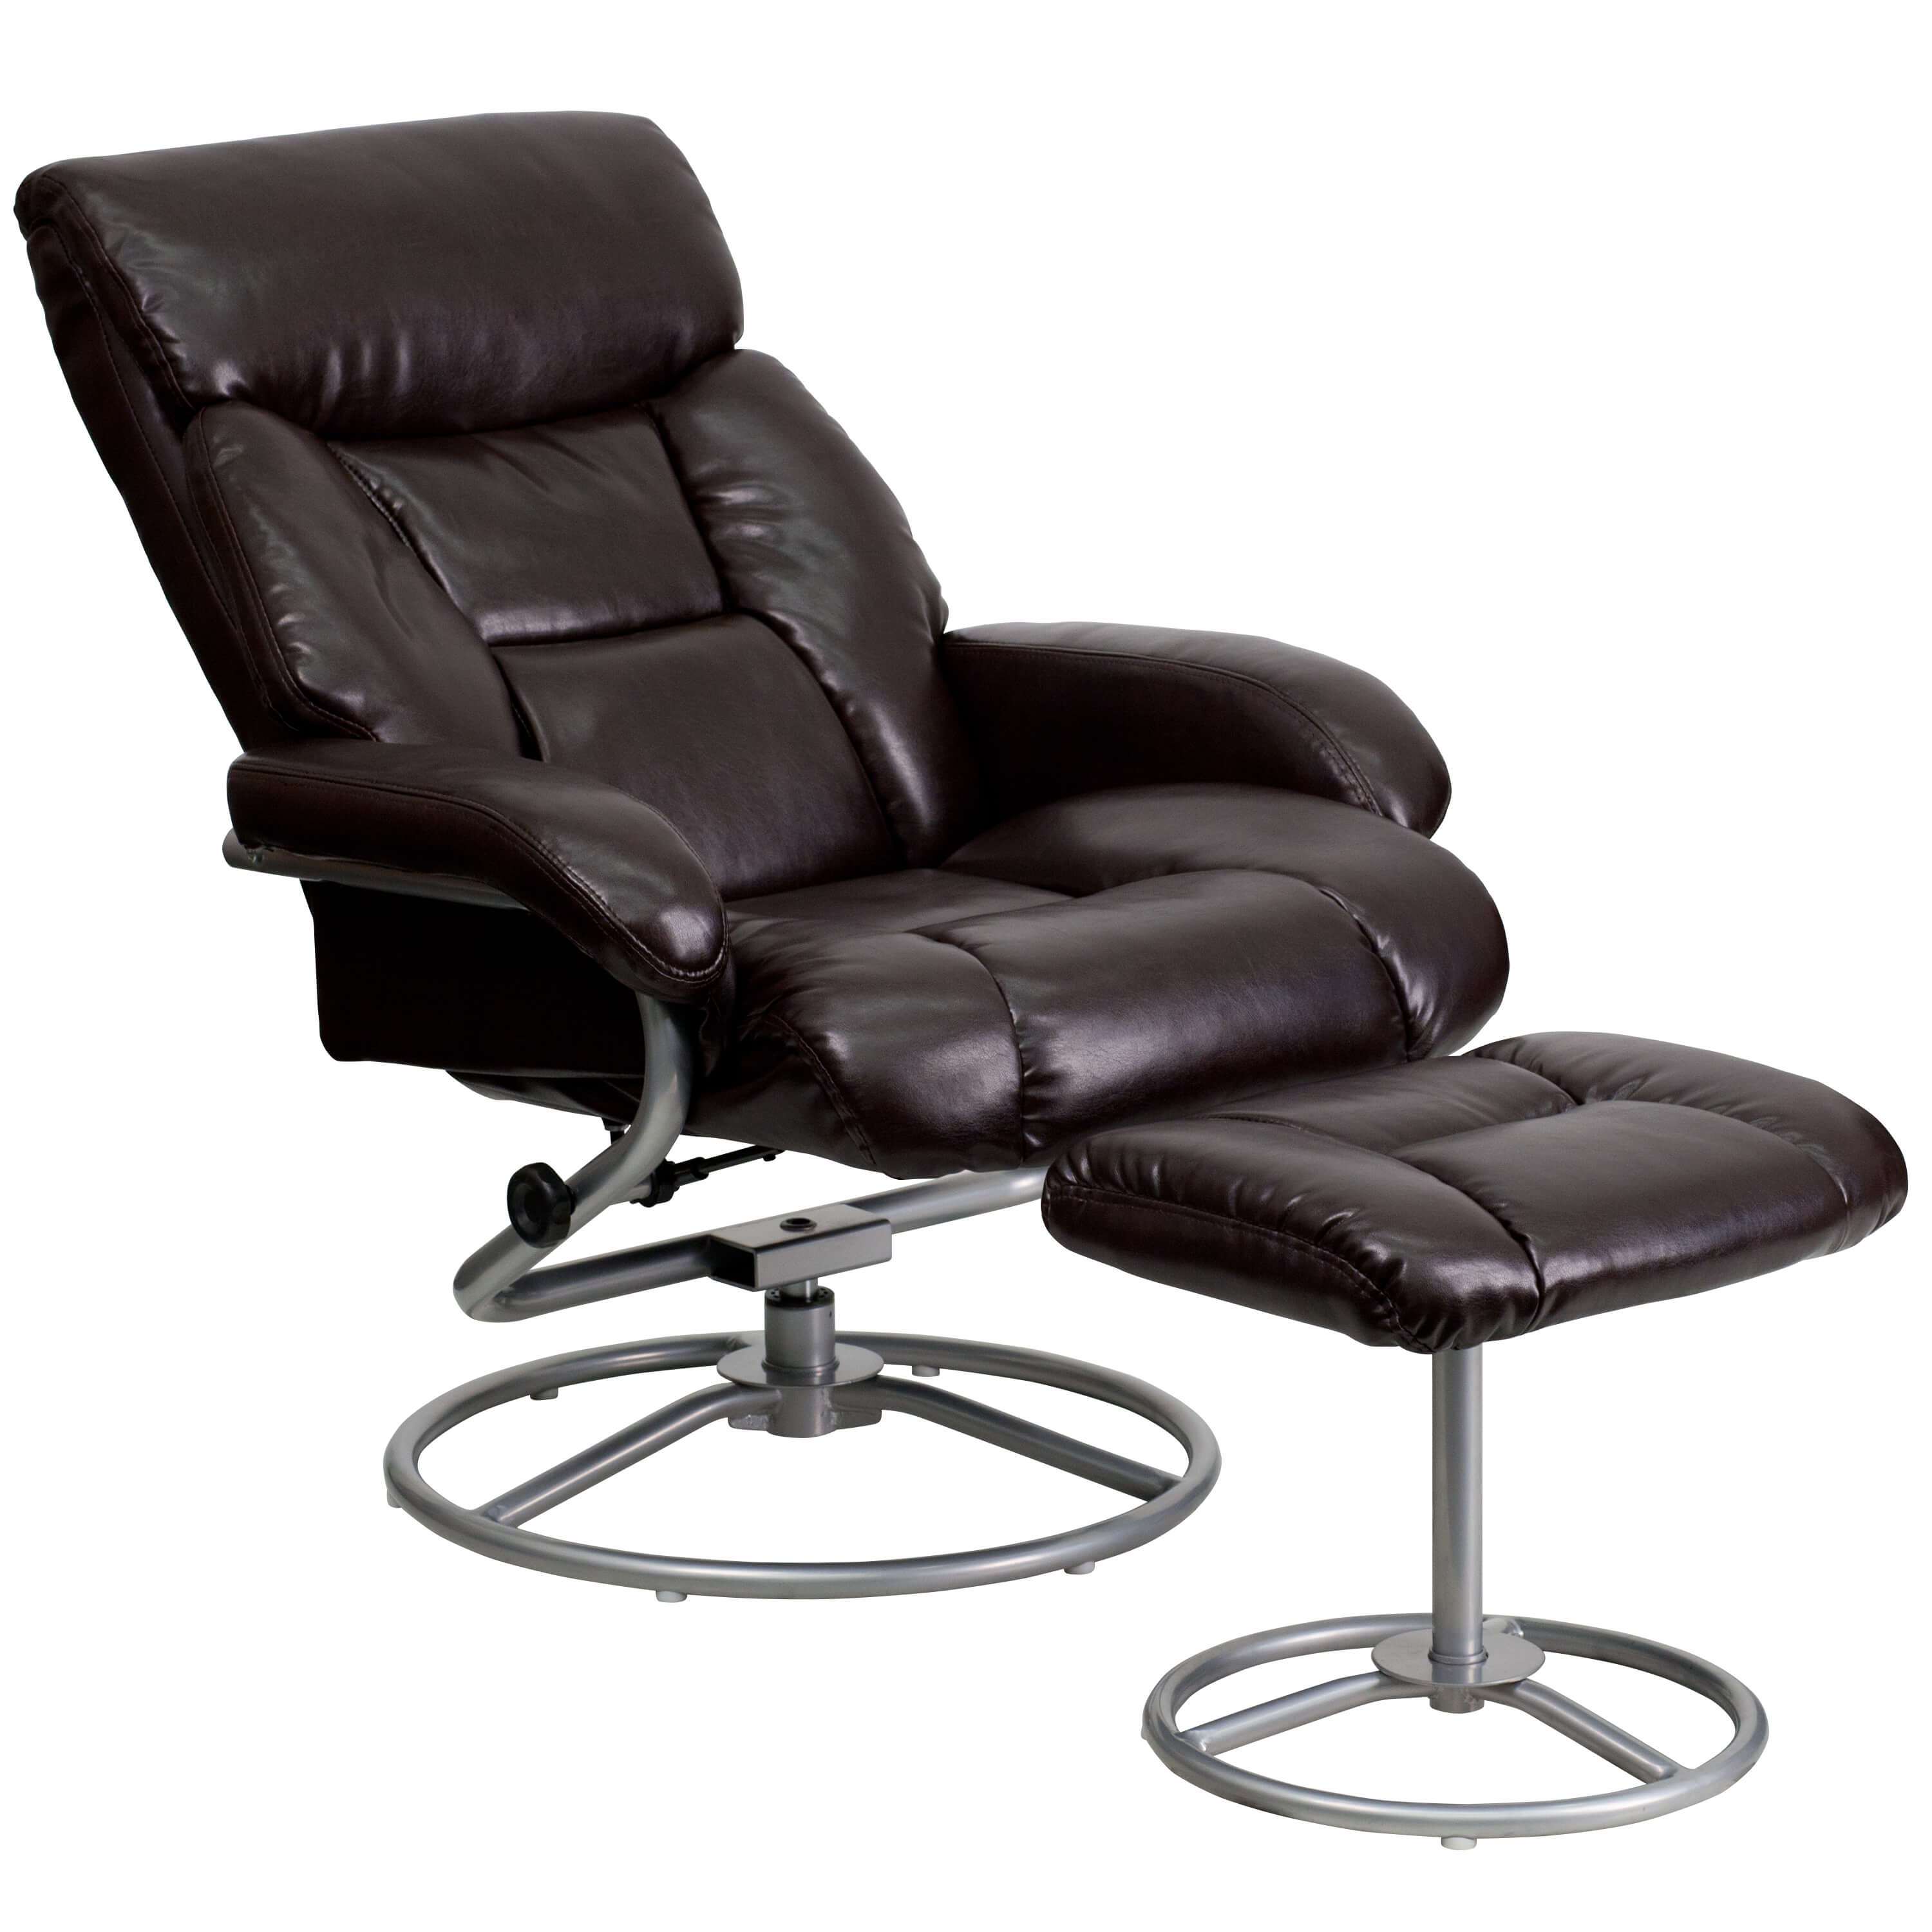 Contemporary leather recliners reclined view